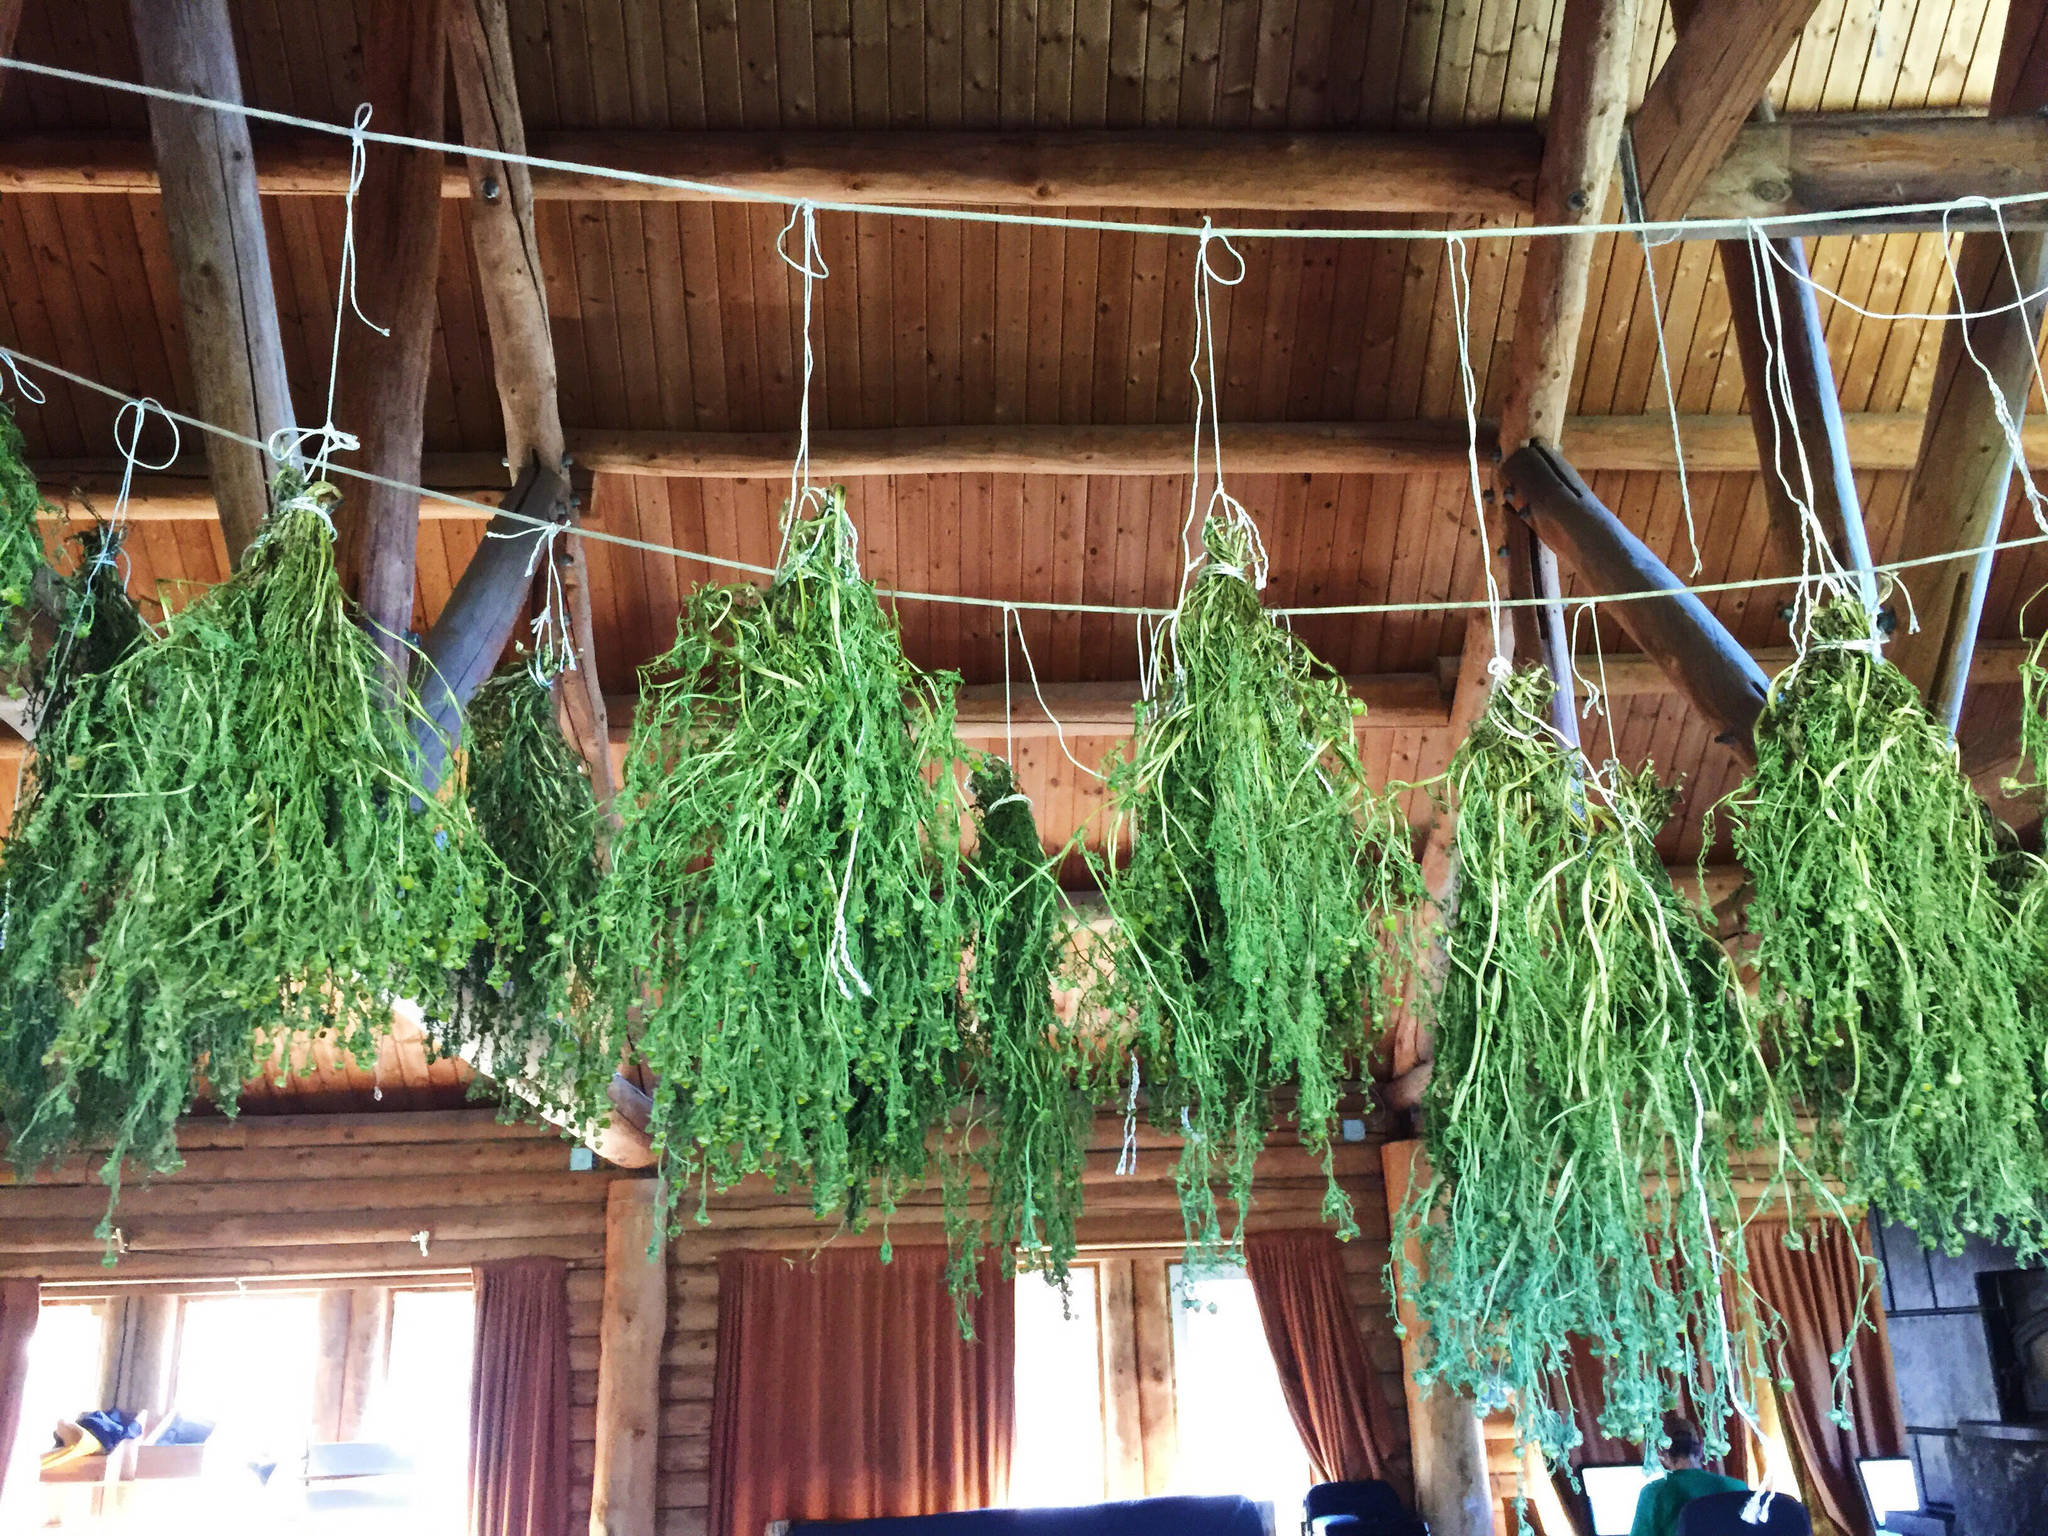 Wild chamomile hangs to dry inside the Ionia Community Center on Tuesday, July 3, near Kasilof, Alaska. (Photo by Victoria Petersen/Peninsula Clarion)